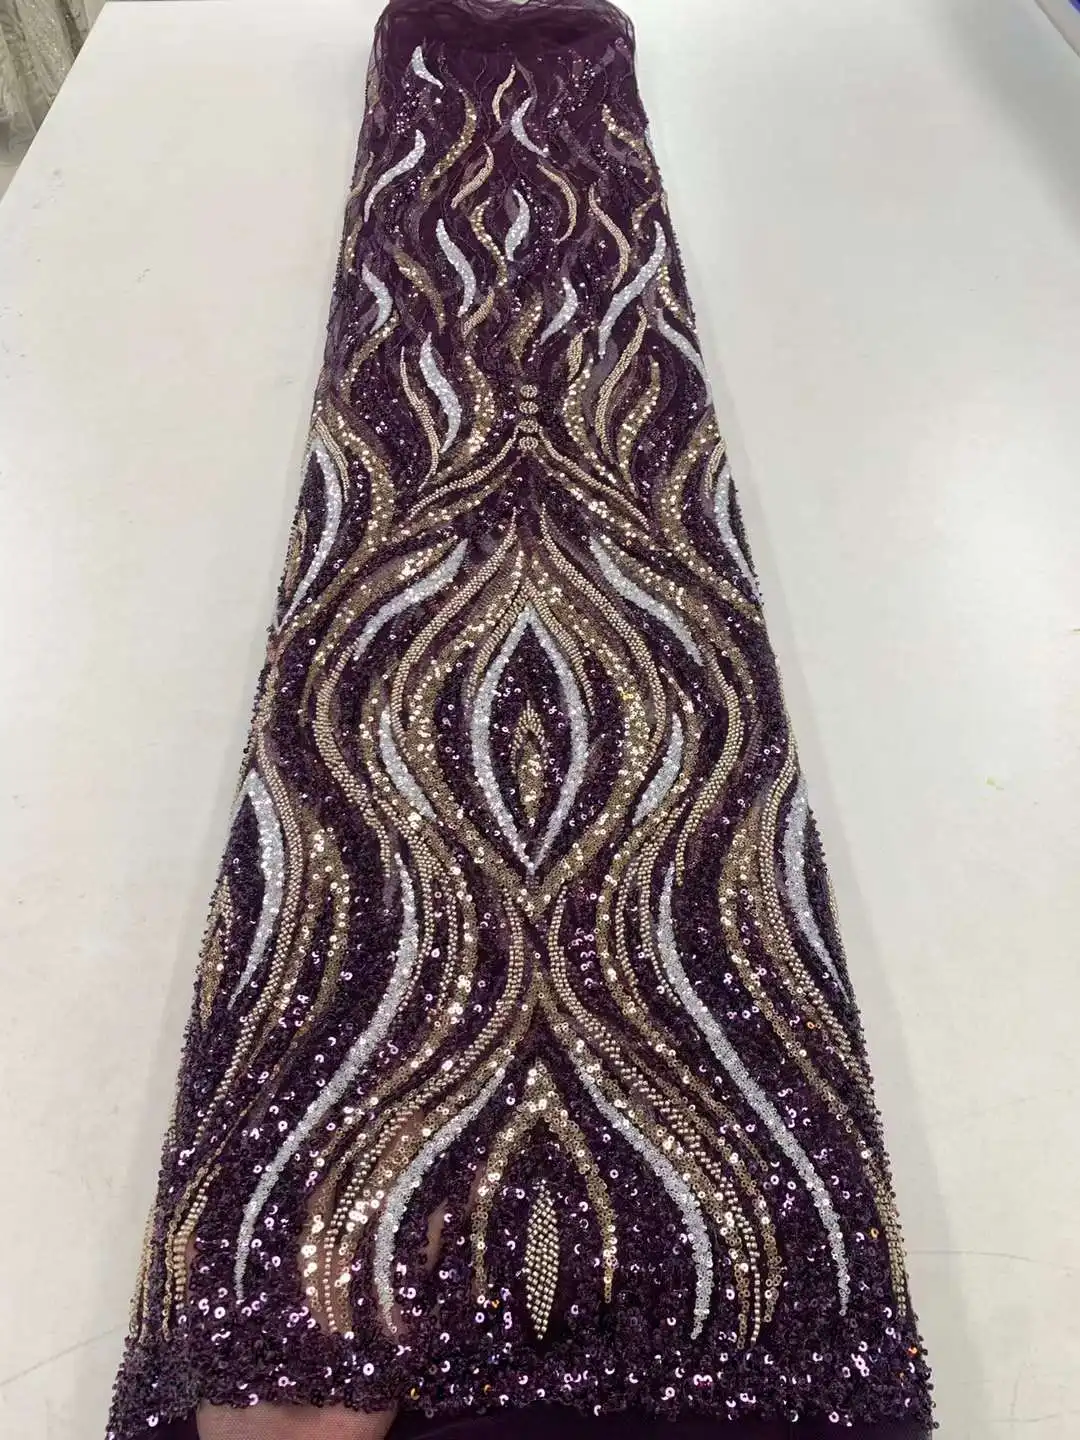 High Quality African Lace Fabric 2023 French Net Sequins Fabric Sewing Embroidered Beads Tulle Nigerian Lace Fabric 5Yards  pgc african lace fabric embroidered nigerian sequins lace fabric 2022 high quality french tulle lace fabric for sewing ya4867b 2